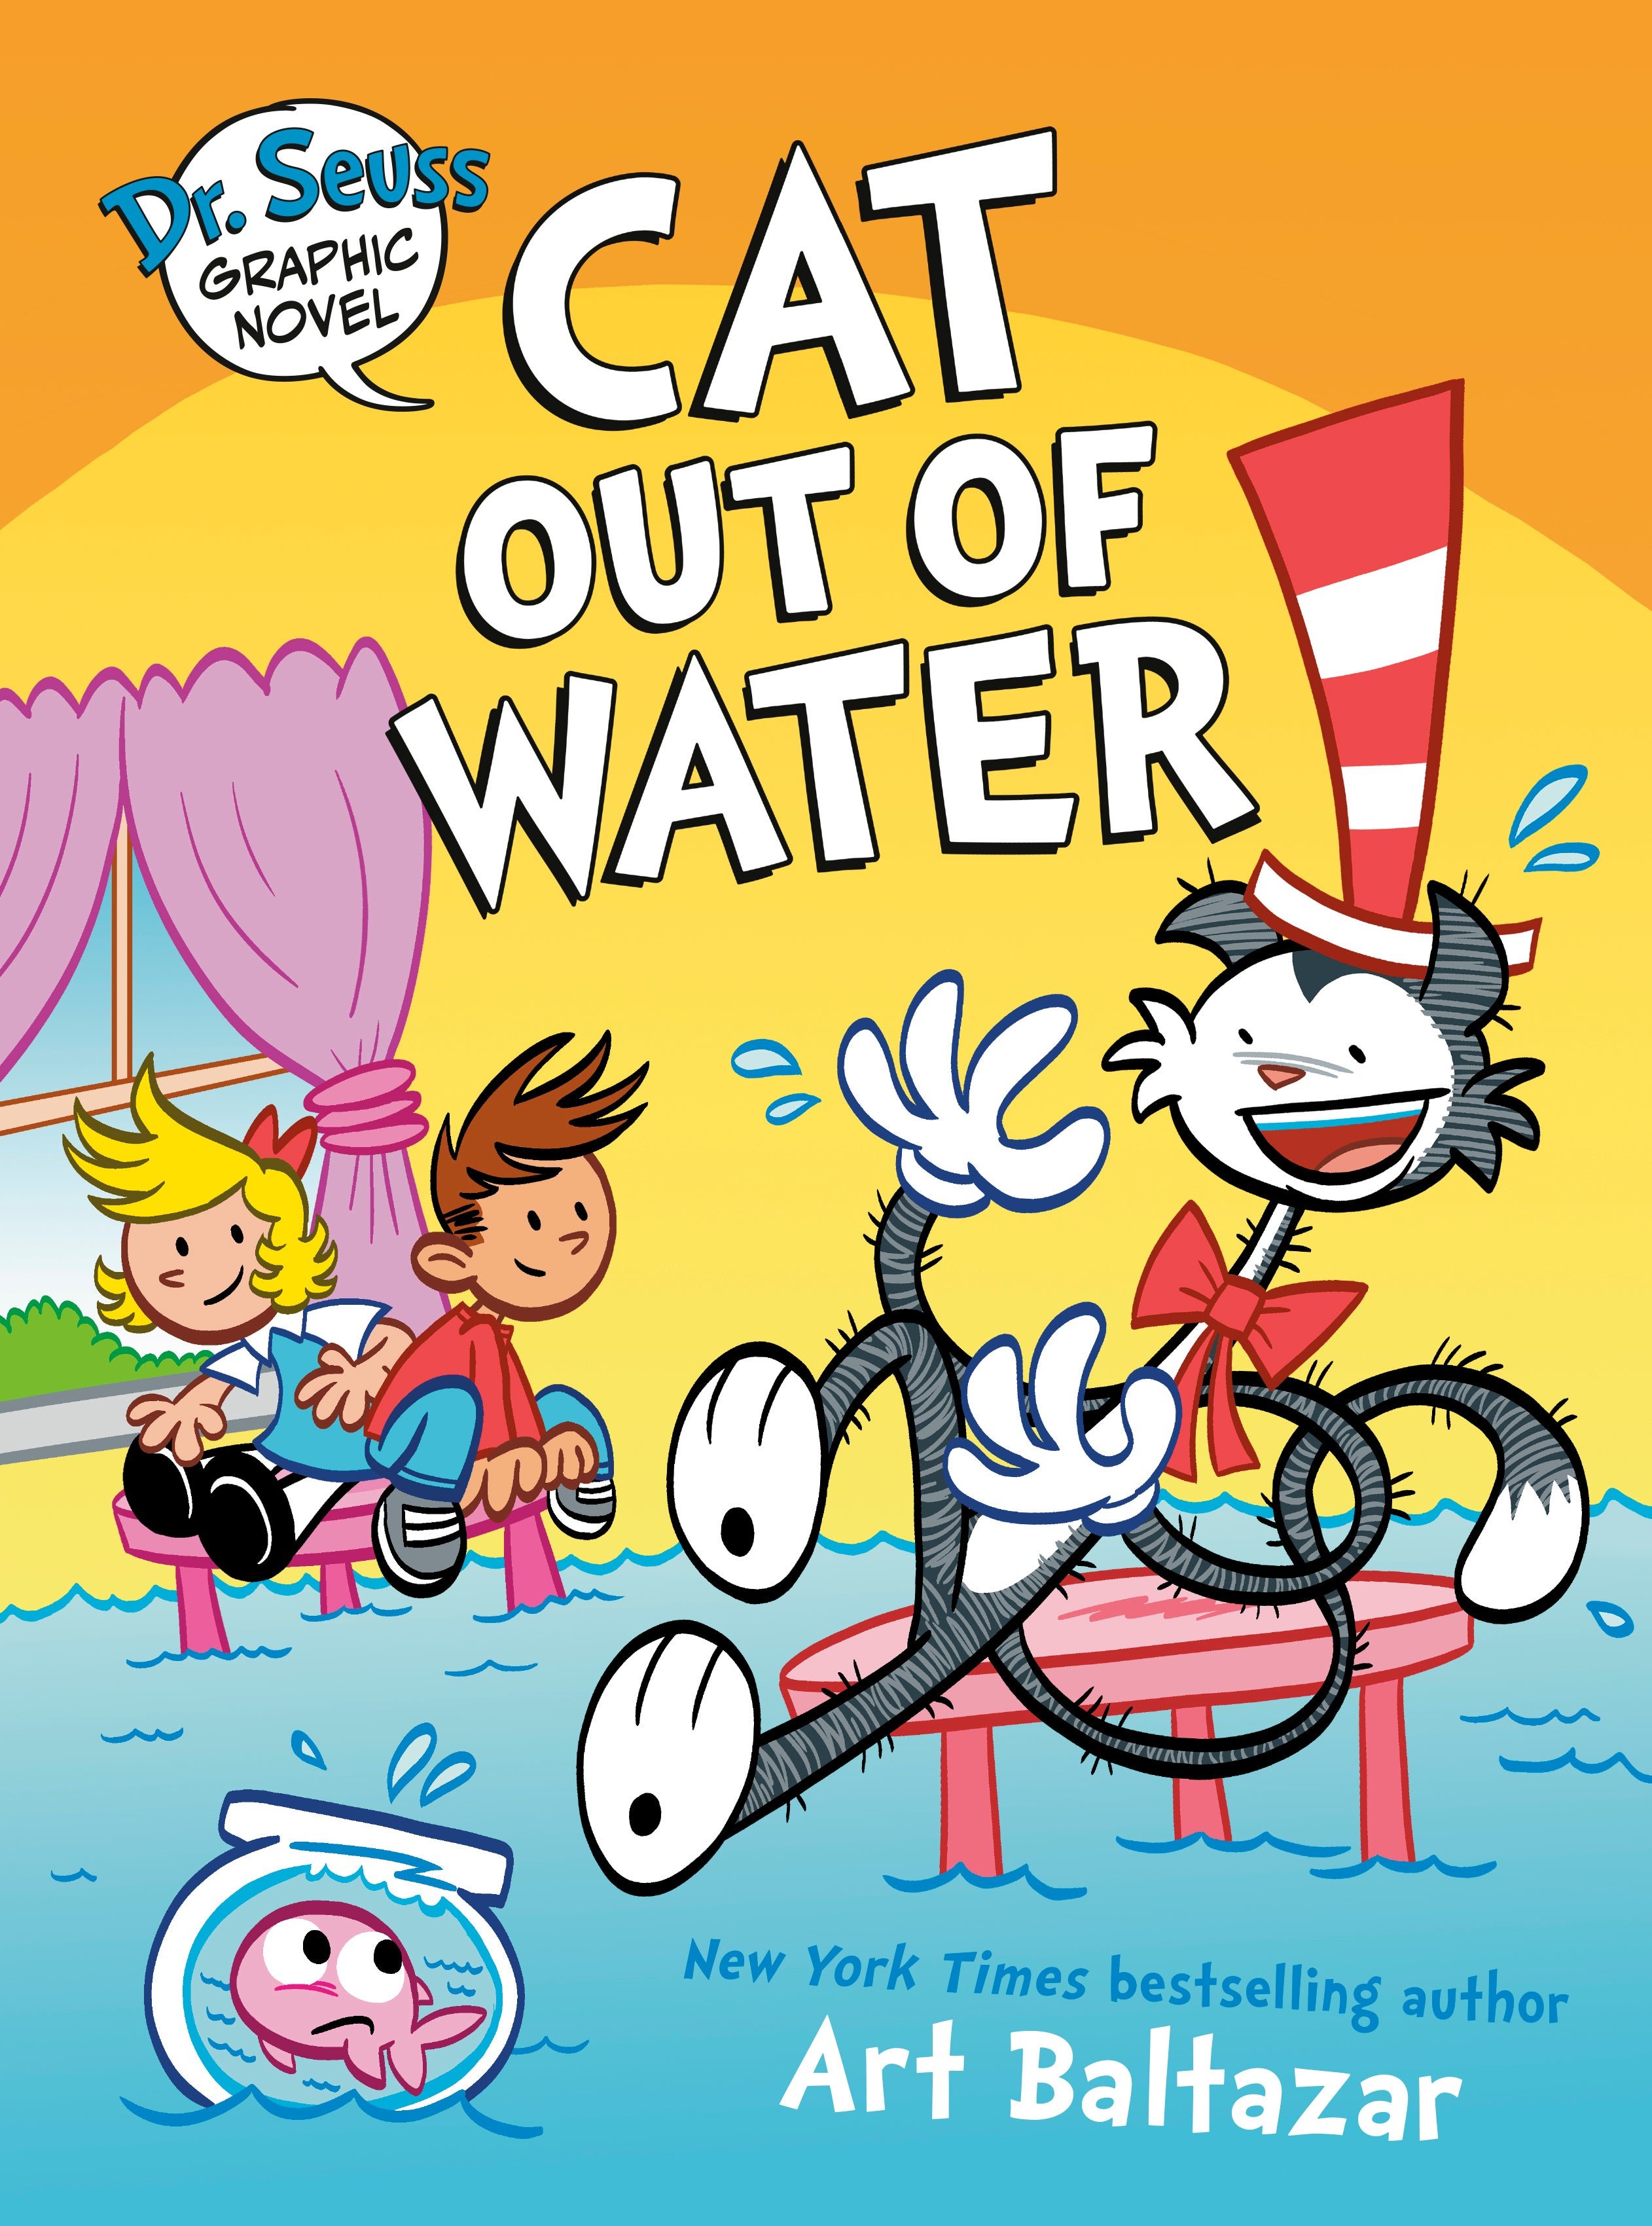 Preview art from Dr. Seuss graphic novel Cat Out of the Water